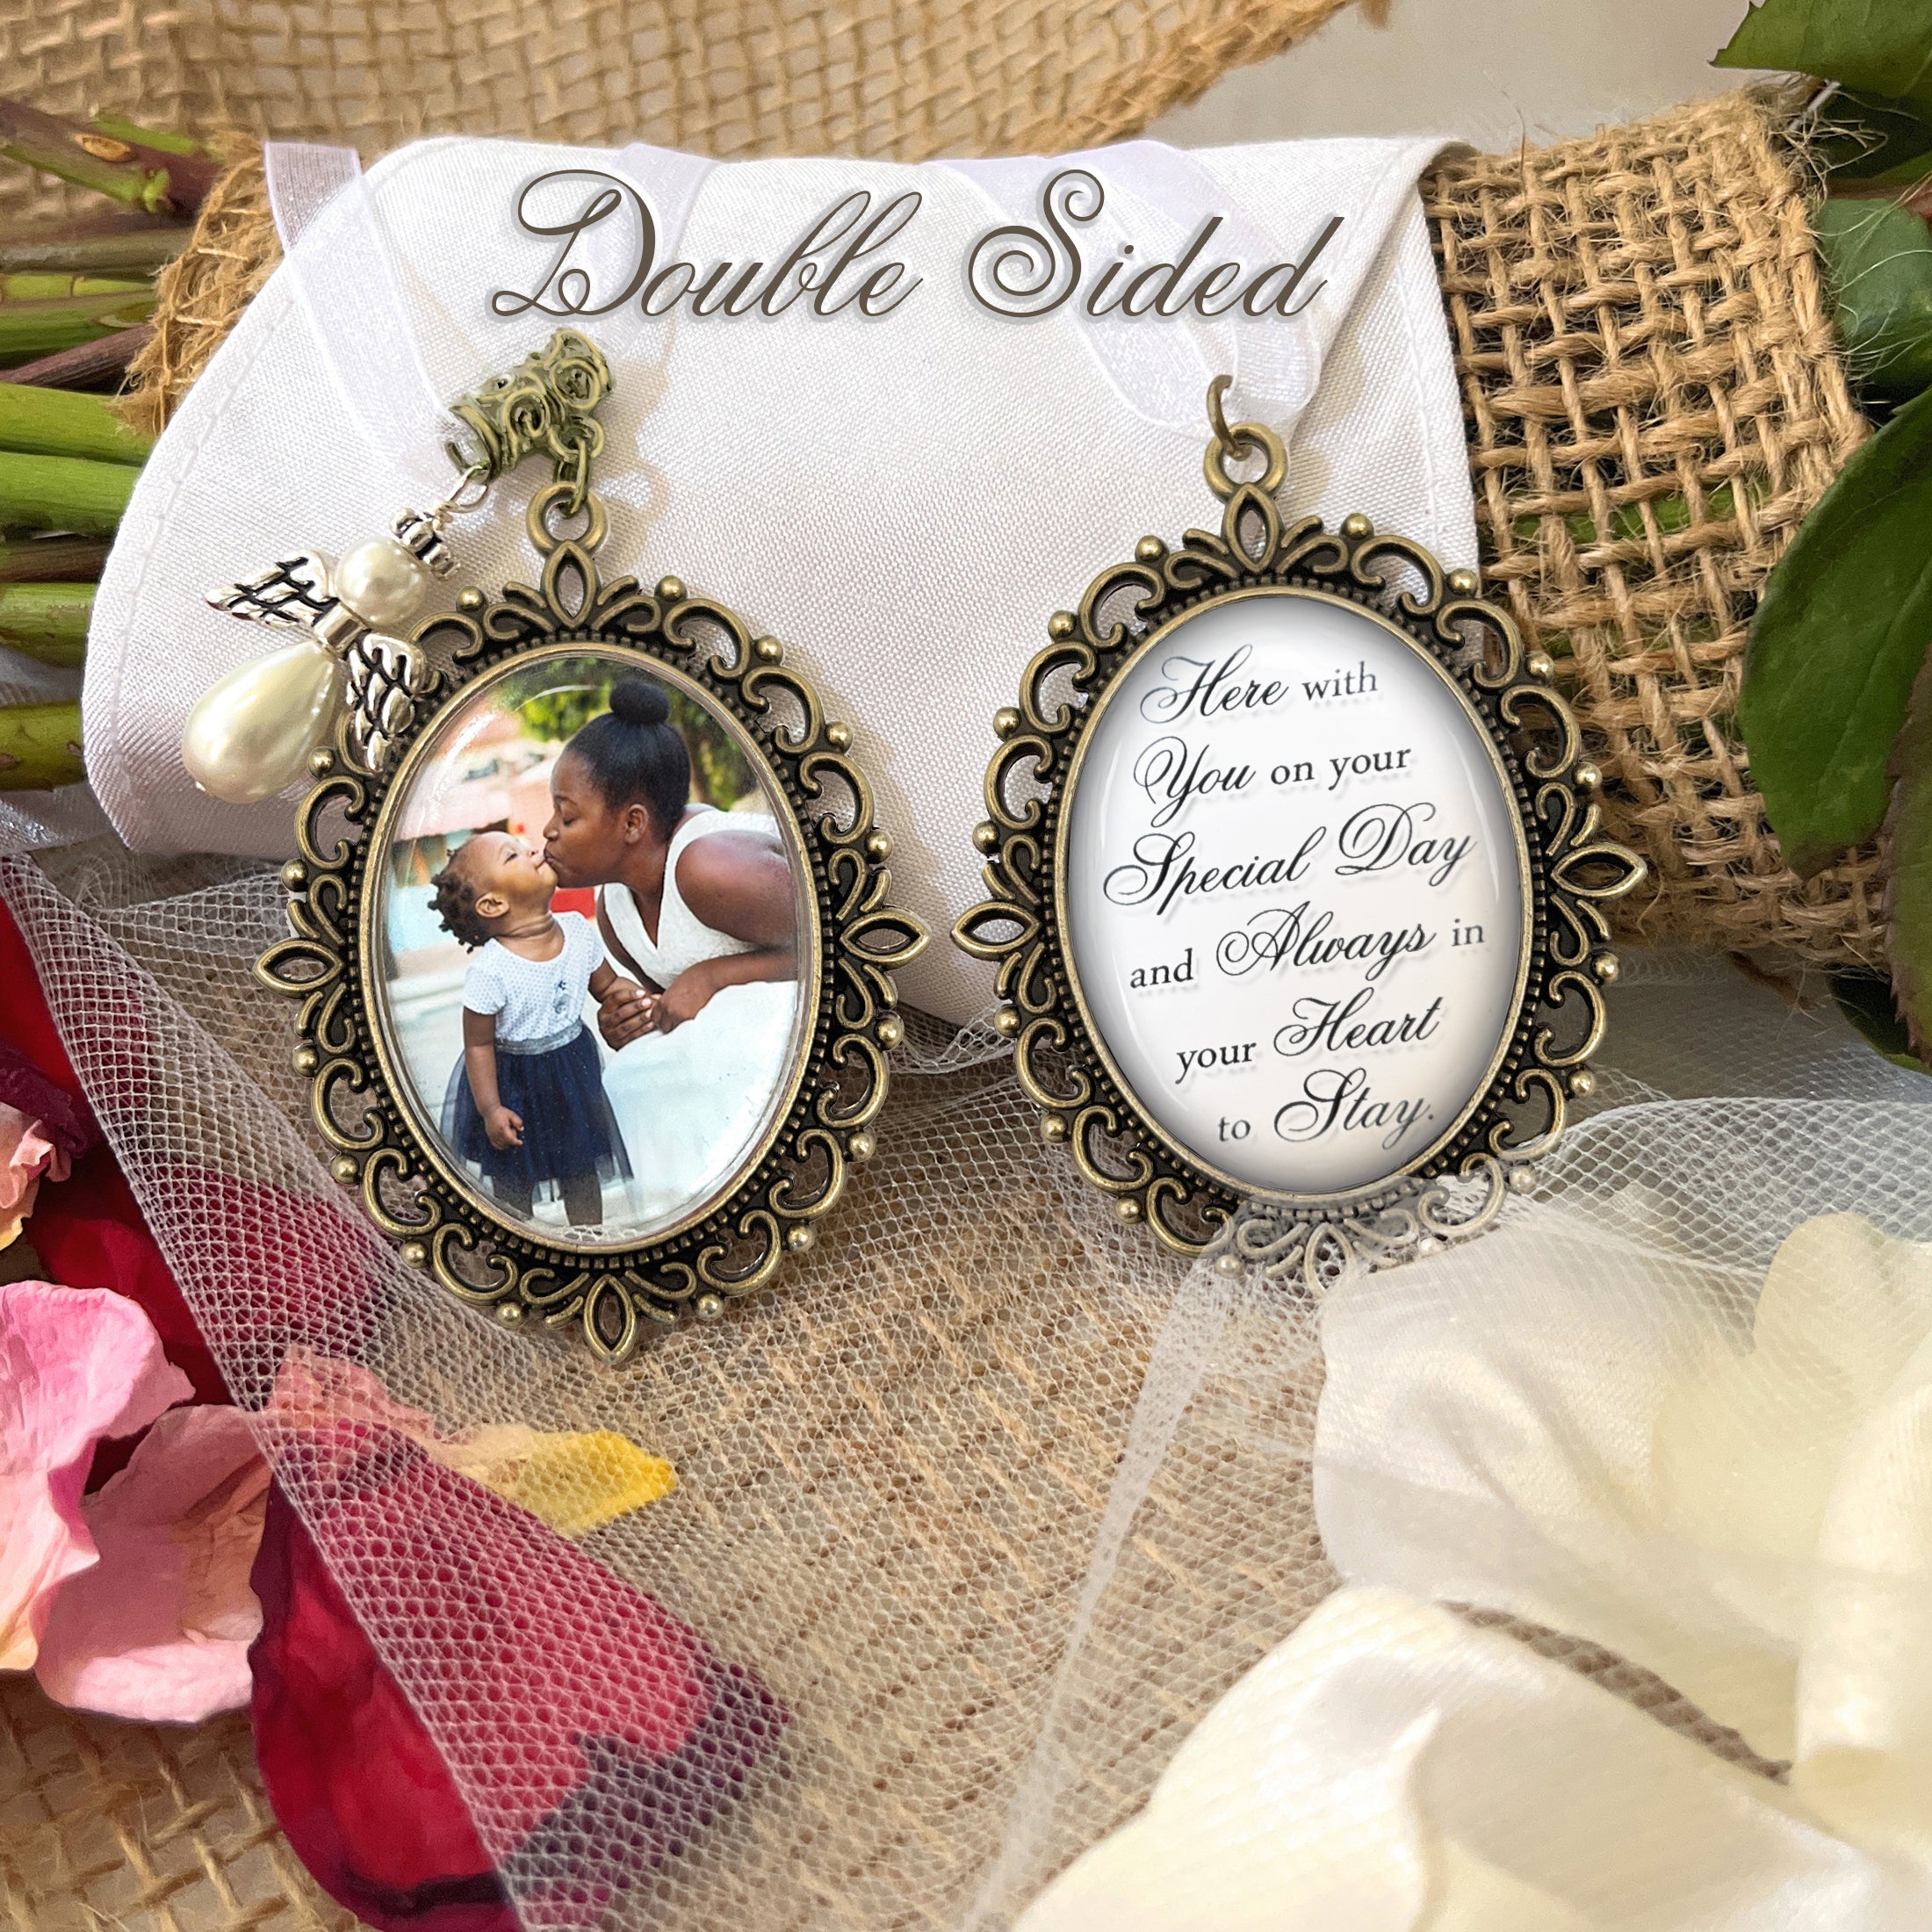 Memorial Bridal Bouquet Charm-Wedding Remembrance Gift for Bride-Memor –  Sugartree and Company